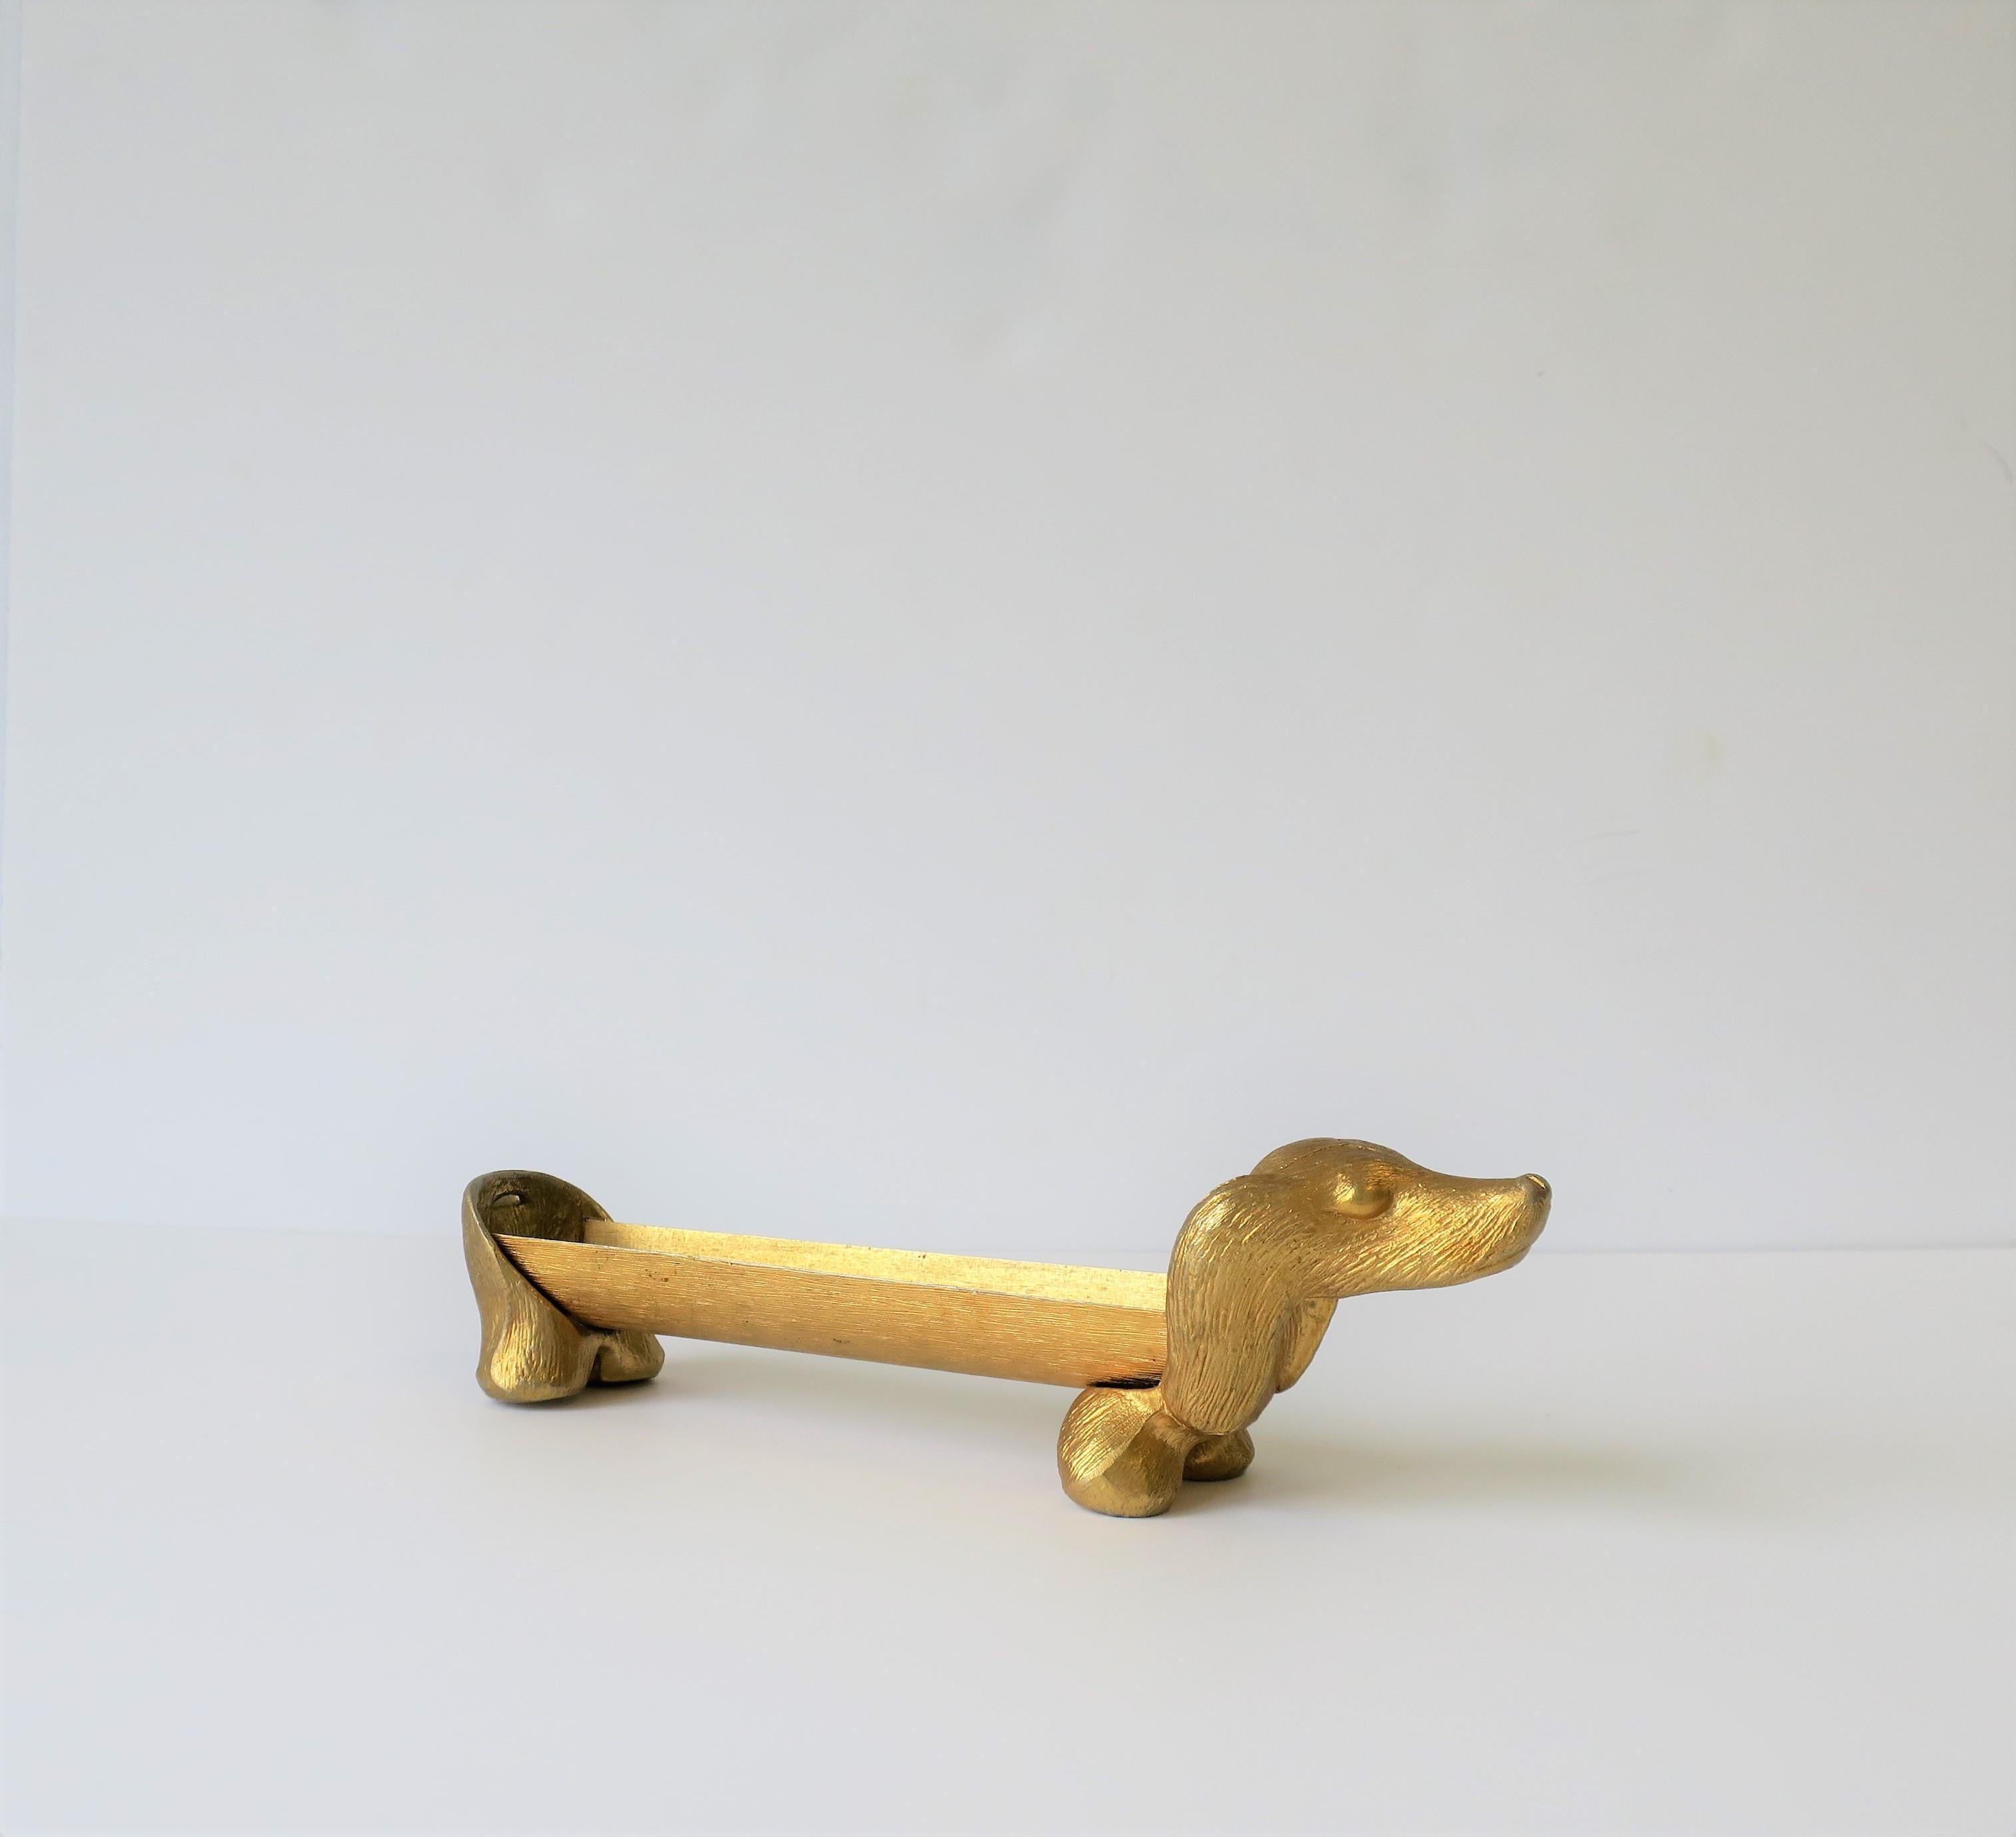 A vintage gold-tone Dachshund dog cracker or cookie holder, circa 1970s or a little later. Dachshund dog holds round cookies or crackers, e.g., 'Ritz' crackers. A great entertaining piece. 

Dog measures: 11.75